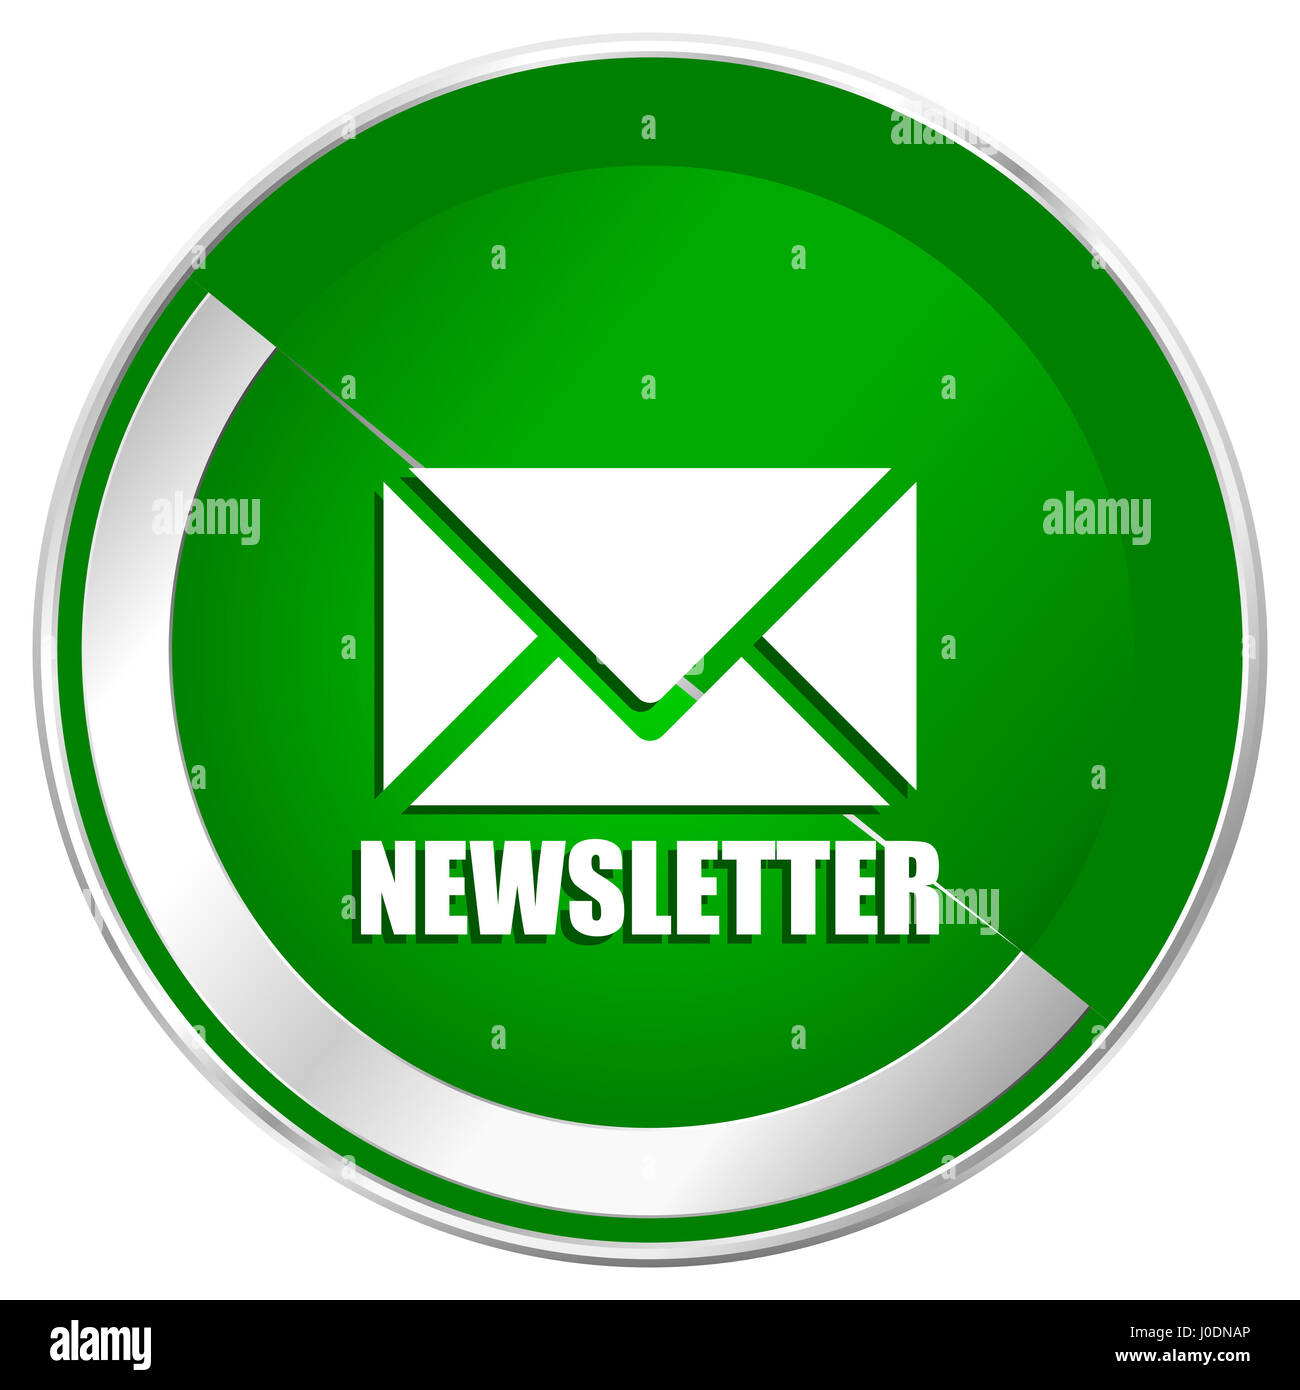 Newsletter Silver Metallic Border Green Web Icon For Mobile Apps And Internet Stock Photo Alamy